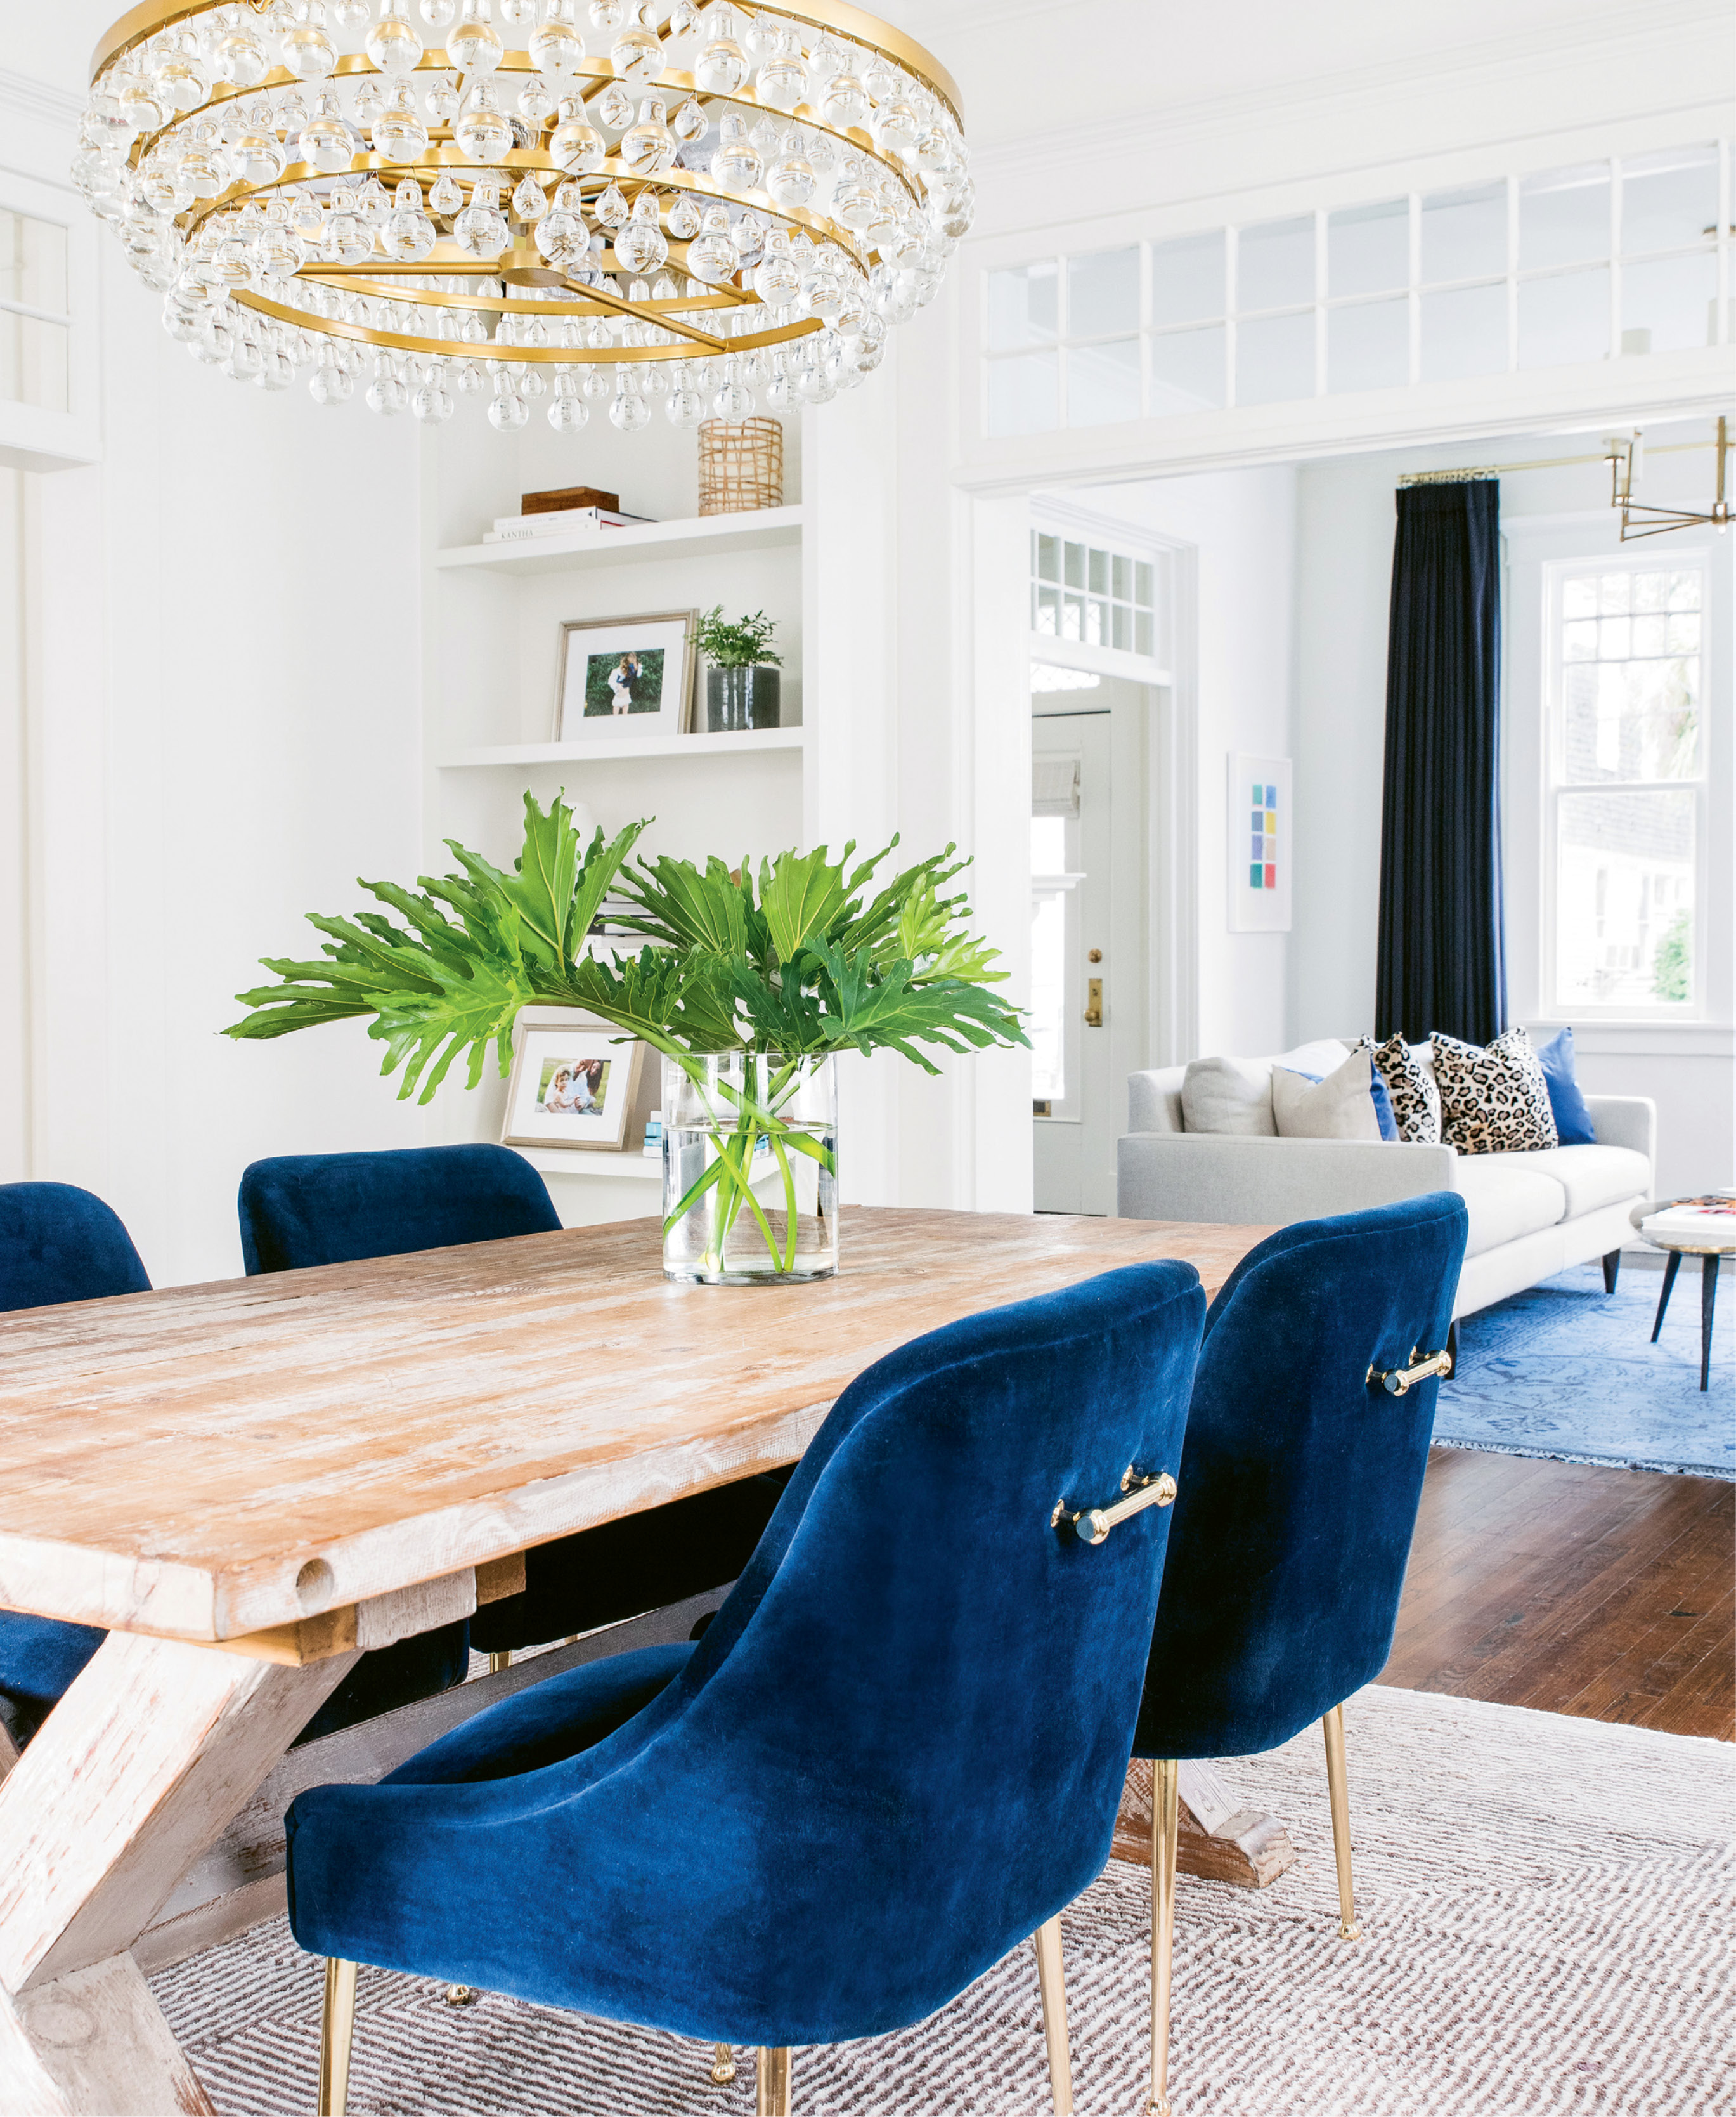 Lived-in Luxe - Alison and Parker Green’s century-old home holds an eclectic mix of fab and functional furnishings in lieu of highbrow antiques—a perfect fit for a young family of four